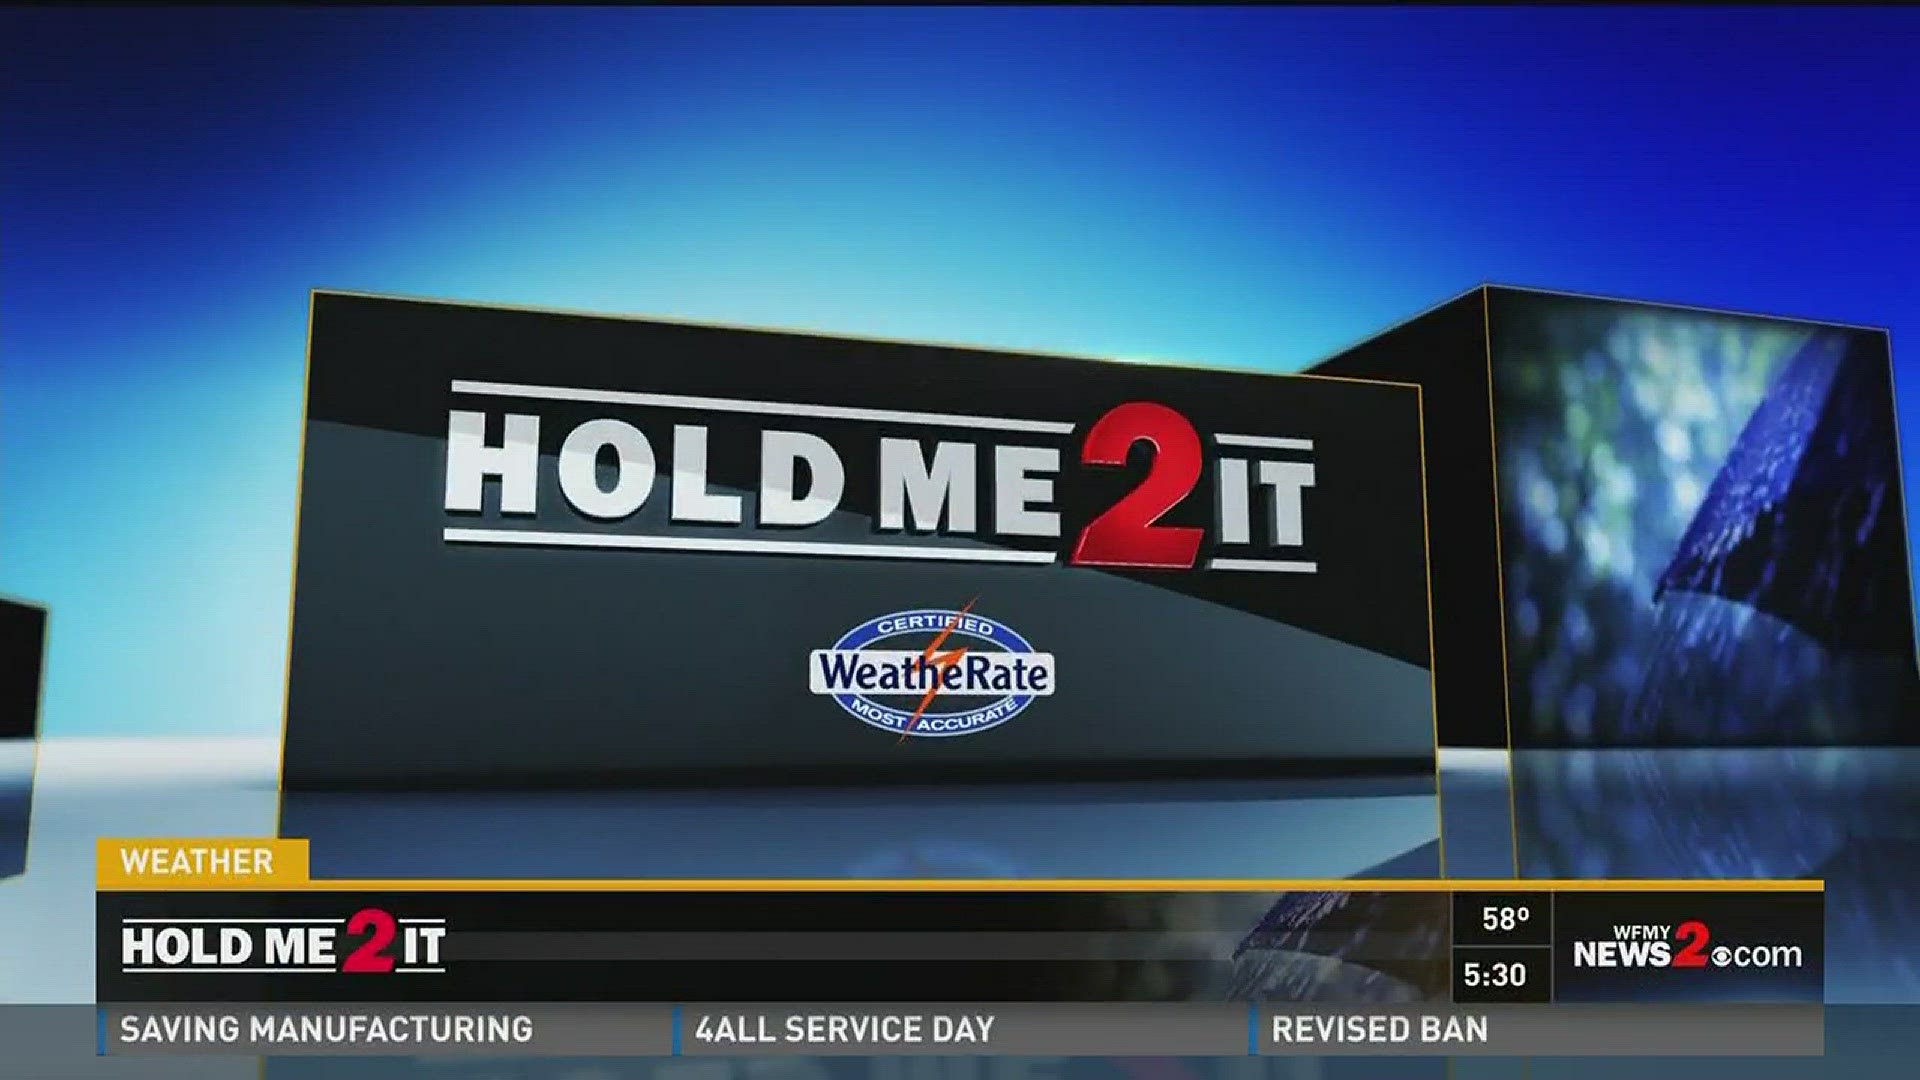 Hold Me 2 It Forecast: Monday March 6, 2017